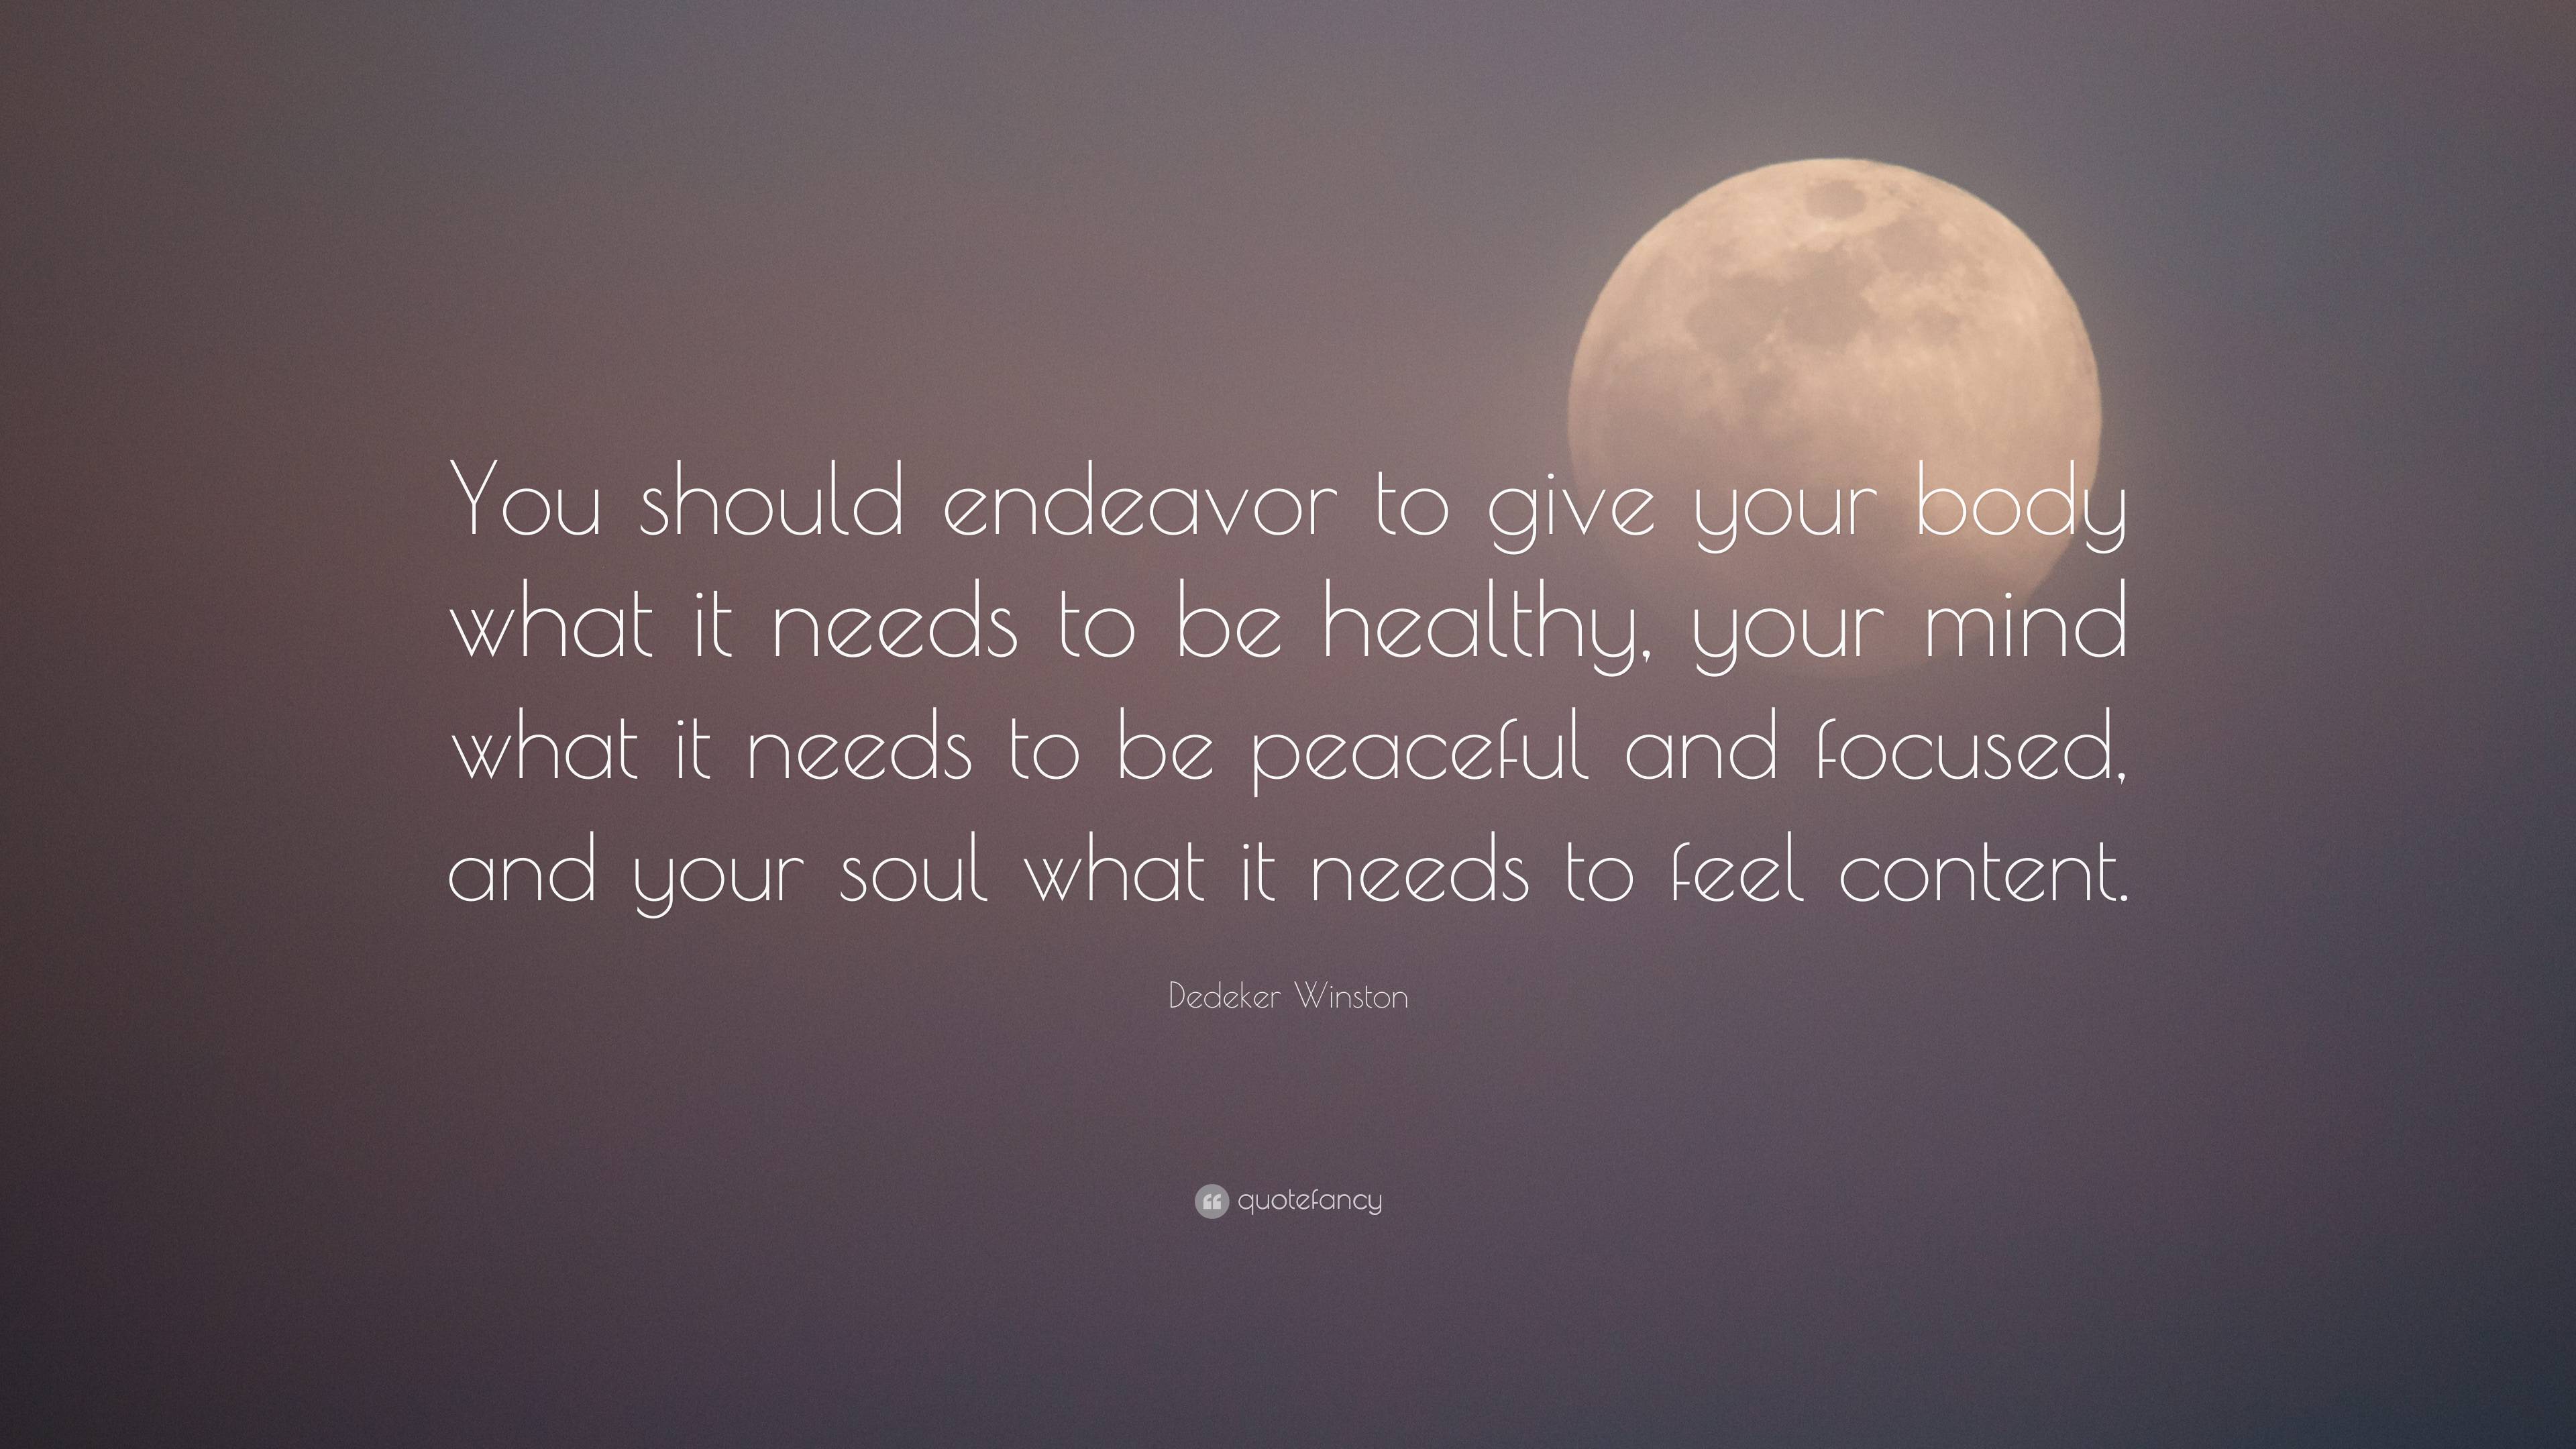 Dedeker Winston Quote: “You should endeavor to give your body what it ...